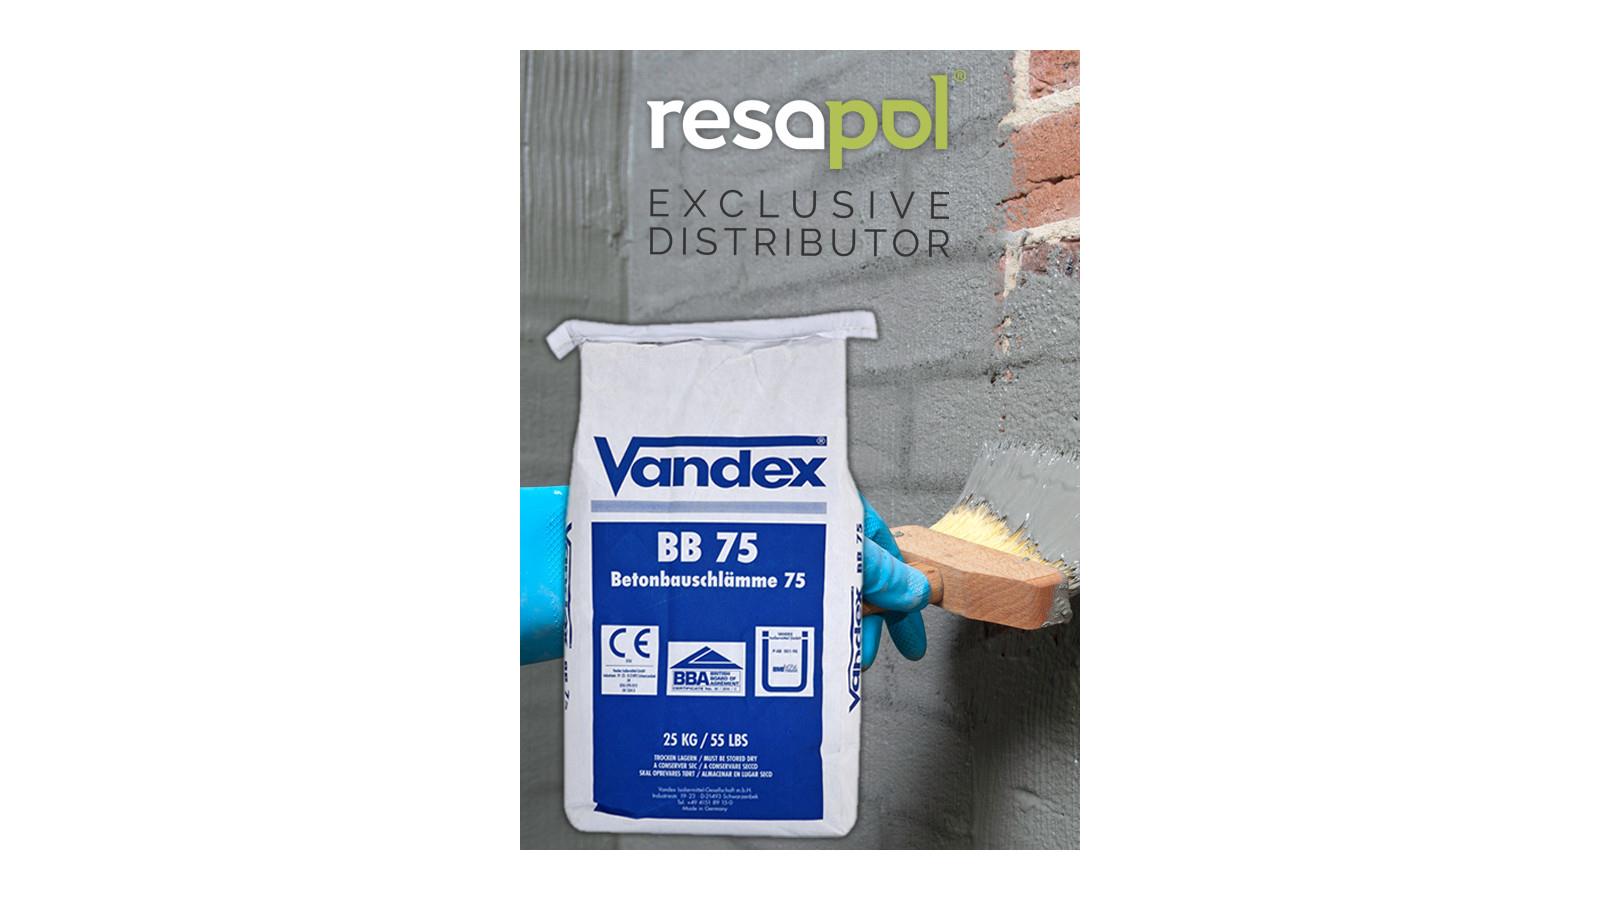 Leading tanking solution, Vandex BB 75, available from Resapol image